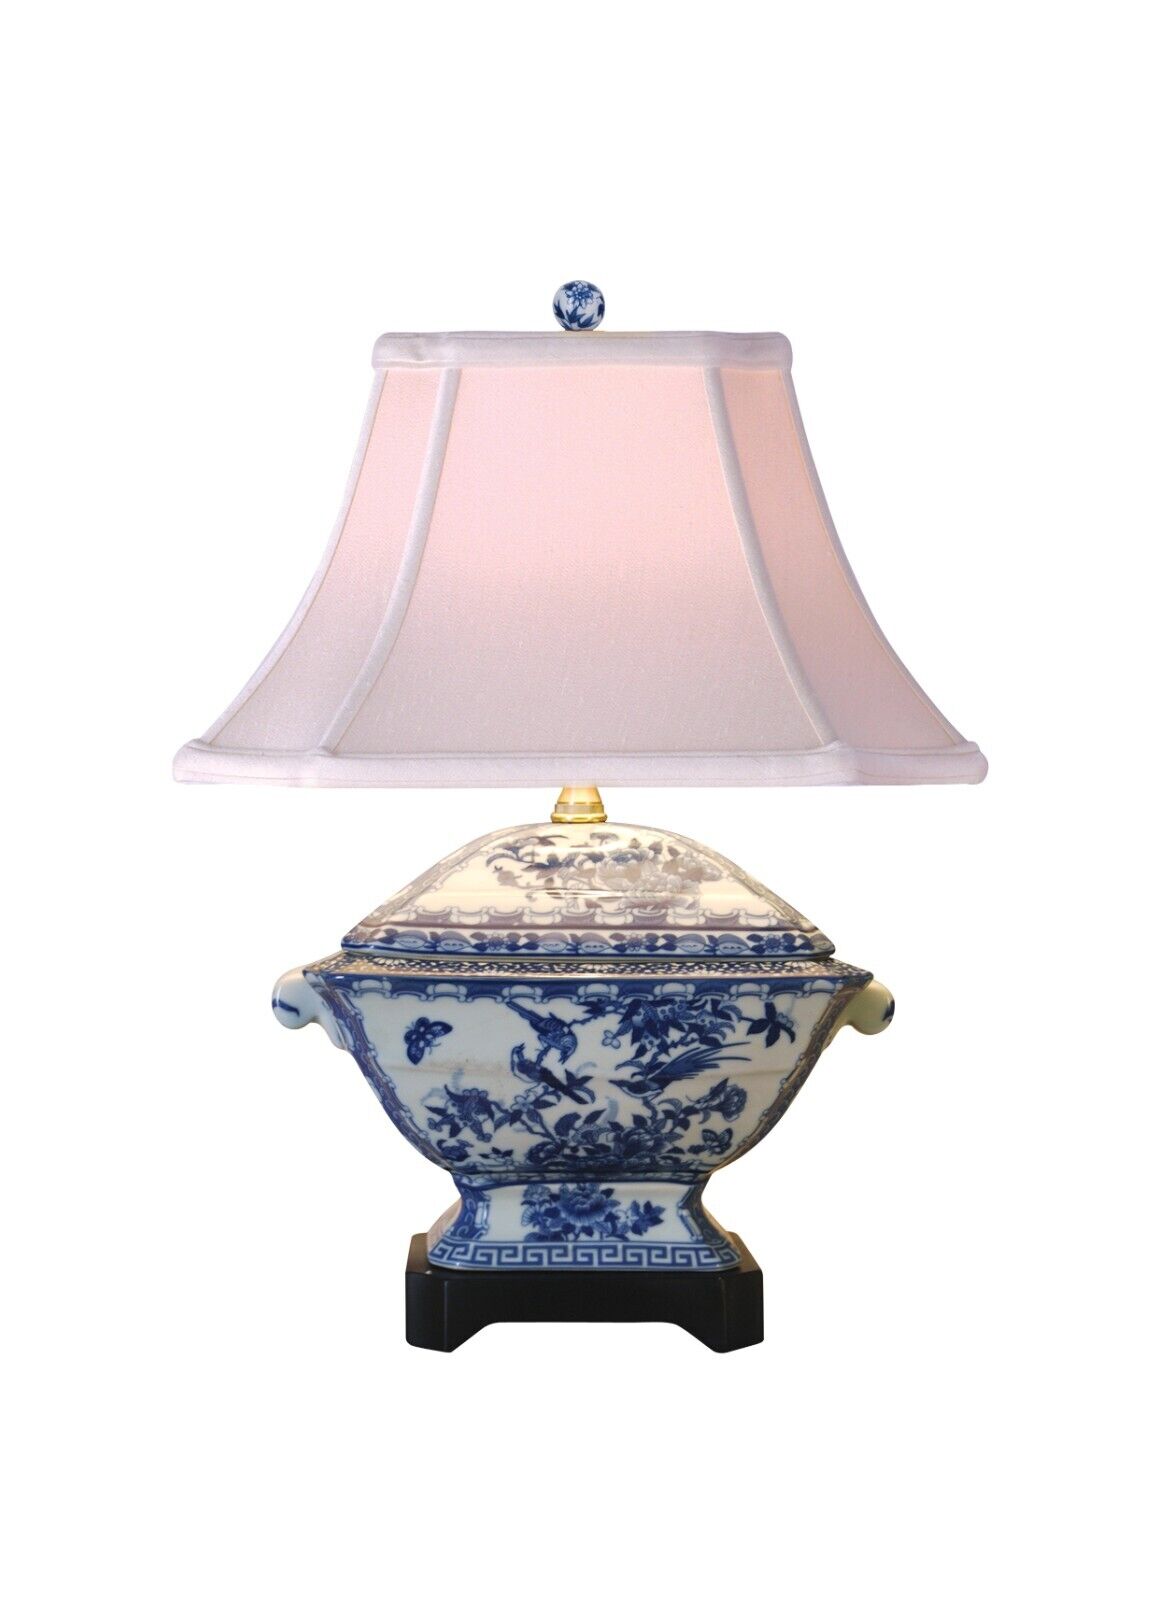 Exquisite Classic Blue and White Porcelain Table Lamp with Traditional Bird Flo